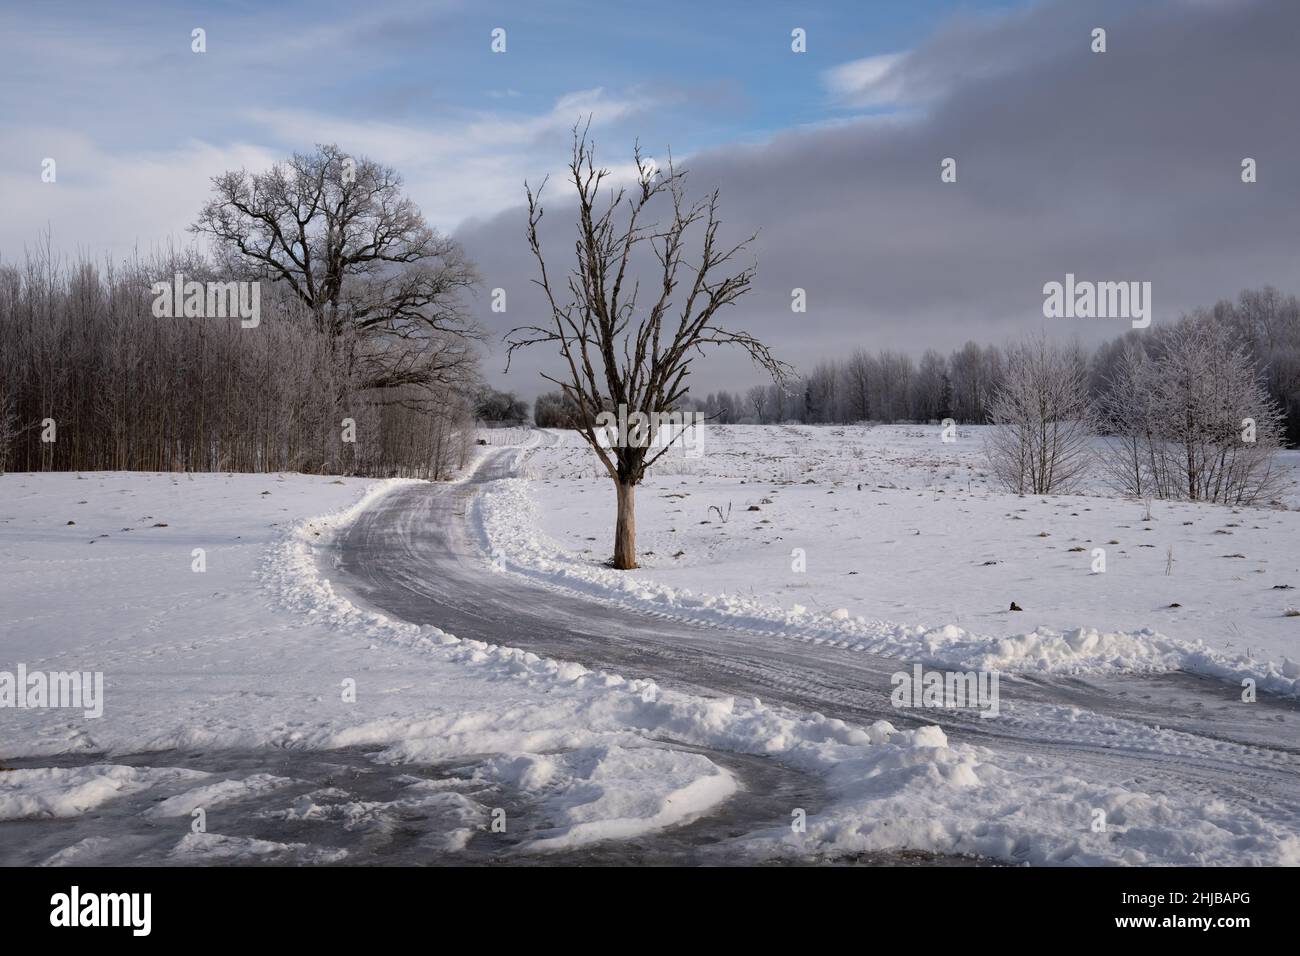 Icy country road and dead tree in winter landscape Stock Photo